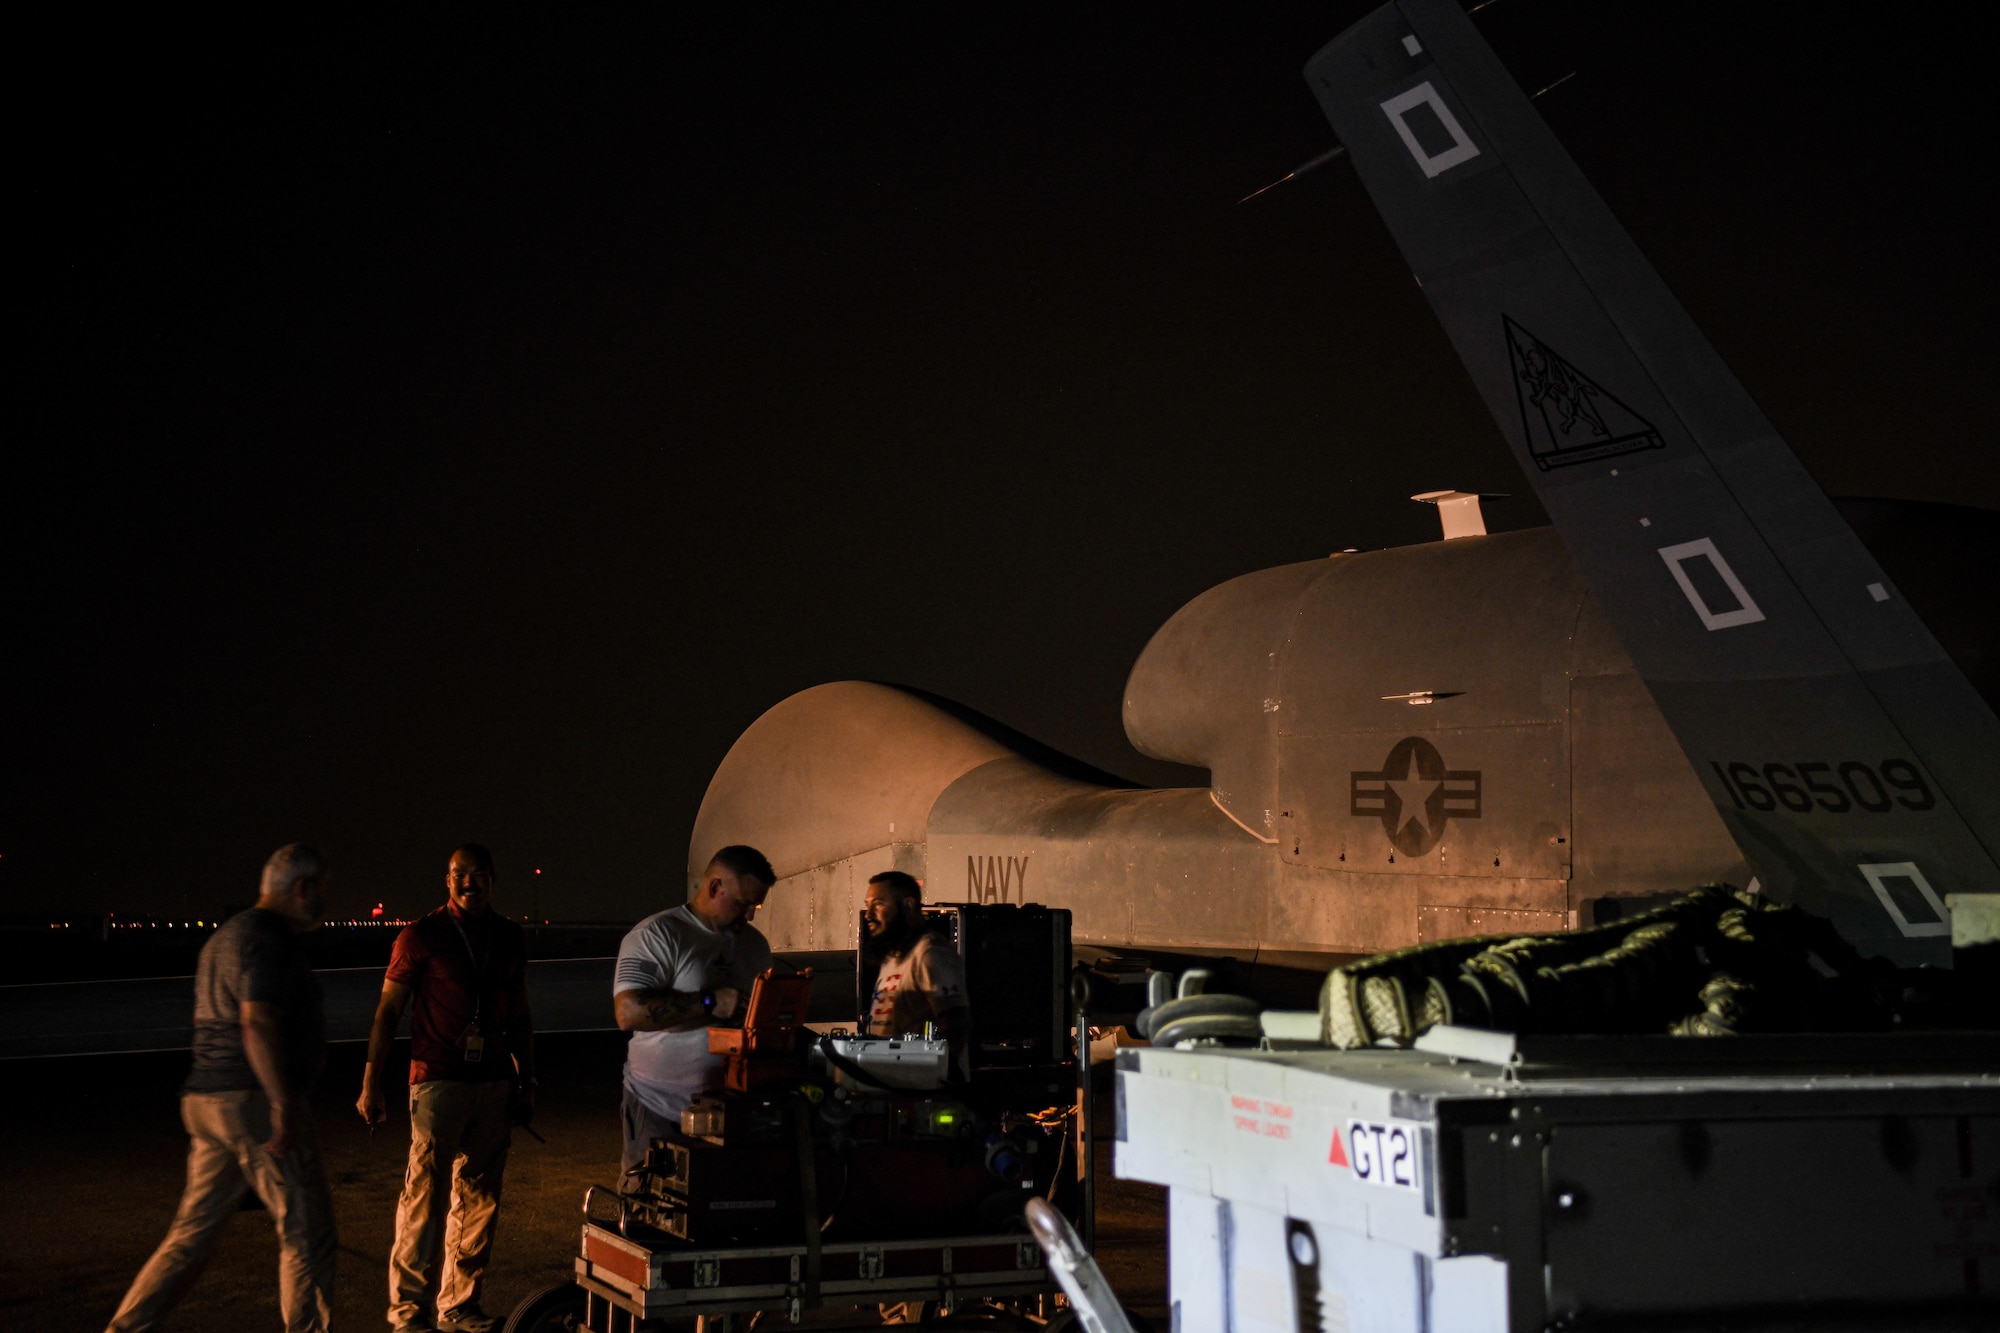 Northrup Grumman contractors perform preflight checks on the last U.S. Navy RQ-4 Global Hawk, attached to the Broad Area Maritime Surveillance Demonstrator mission, June 16, 2022, at Al Dhafra Air Base, United Arab Emirates. The Global Hawk training mission at ADAB was originally scheduled to last six months but mission effectiveness and reliability led to an extension of the mission lasting approximately 13 years.